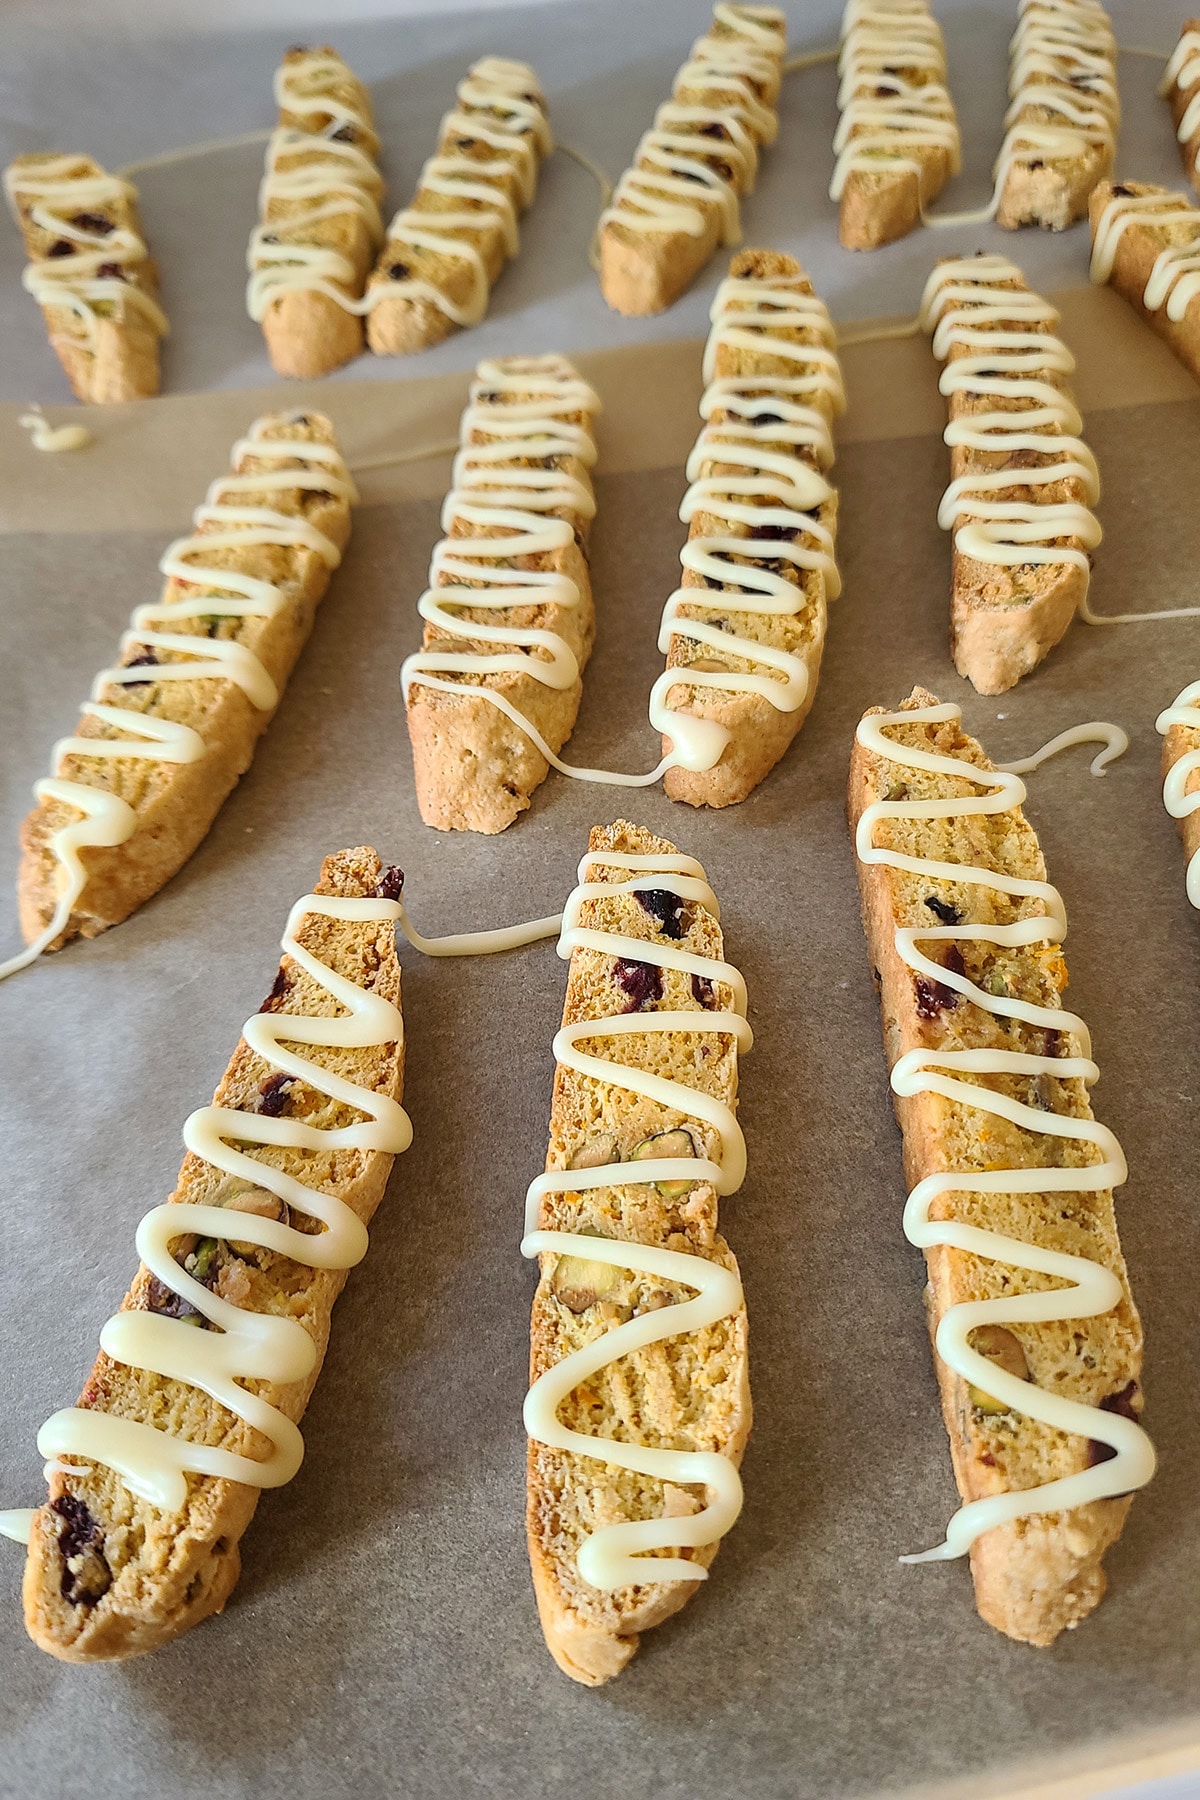 A close up view of the drizzled biscotti arranged on parchment.